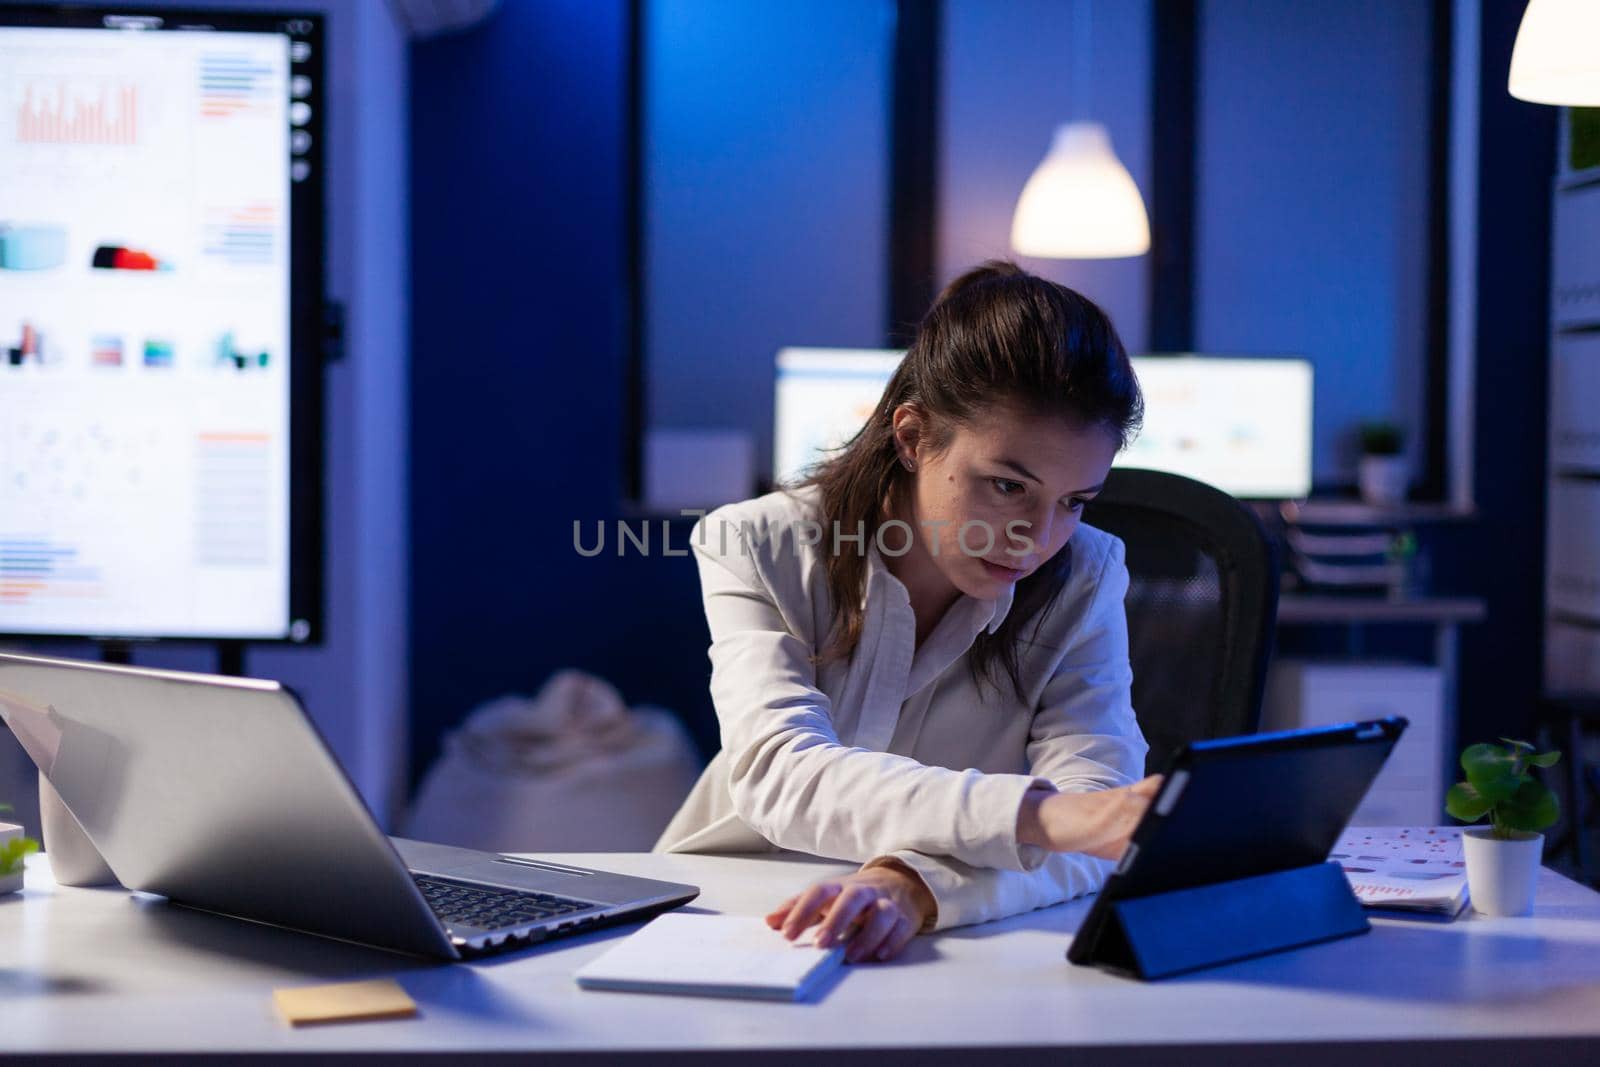 Manager woman using laptop and tablet in same time working on financial reports in business start-up office . Busy multitasking employee using modern technology network wireless late at night